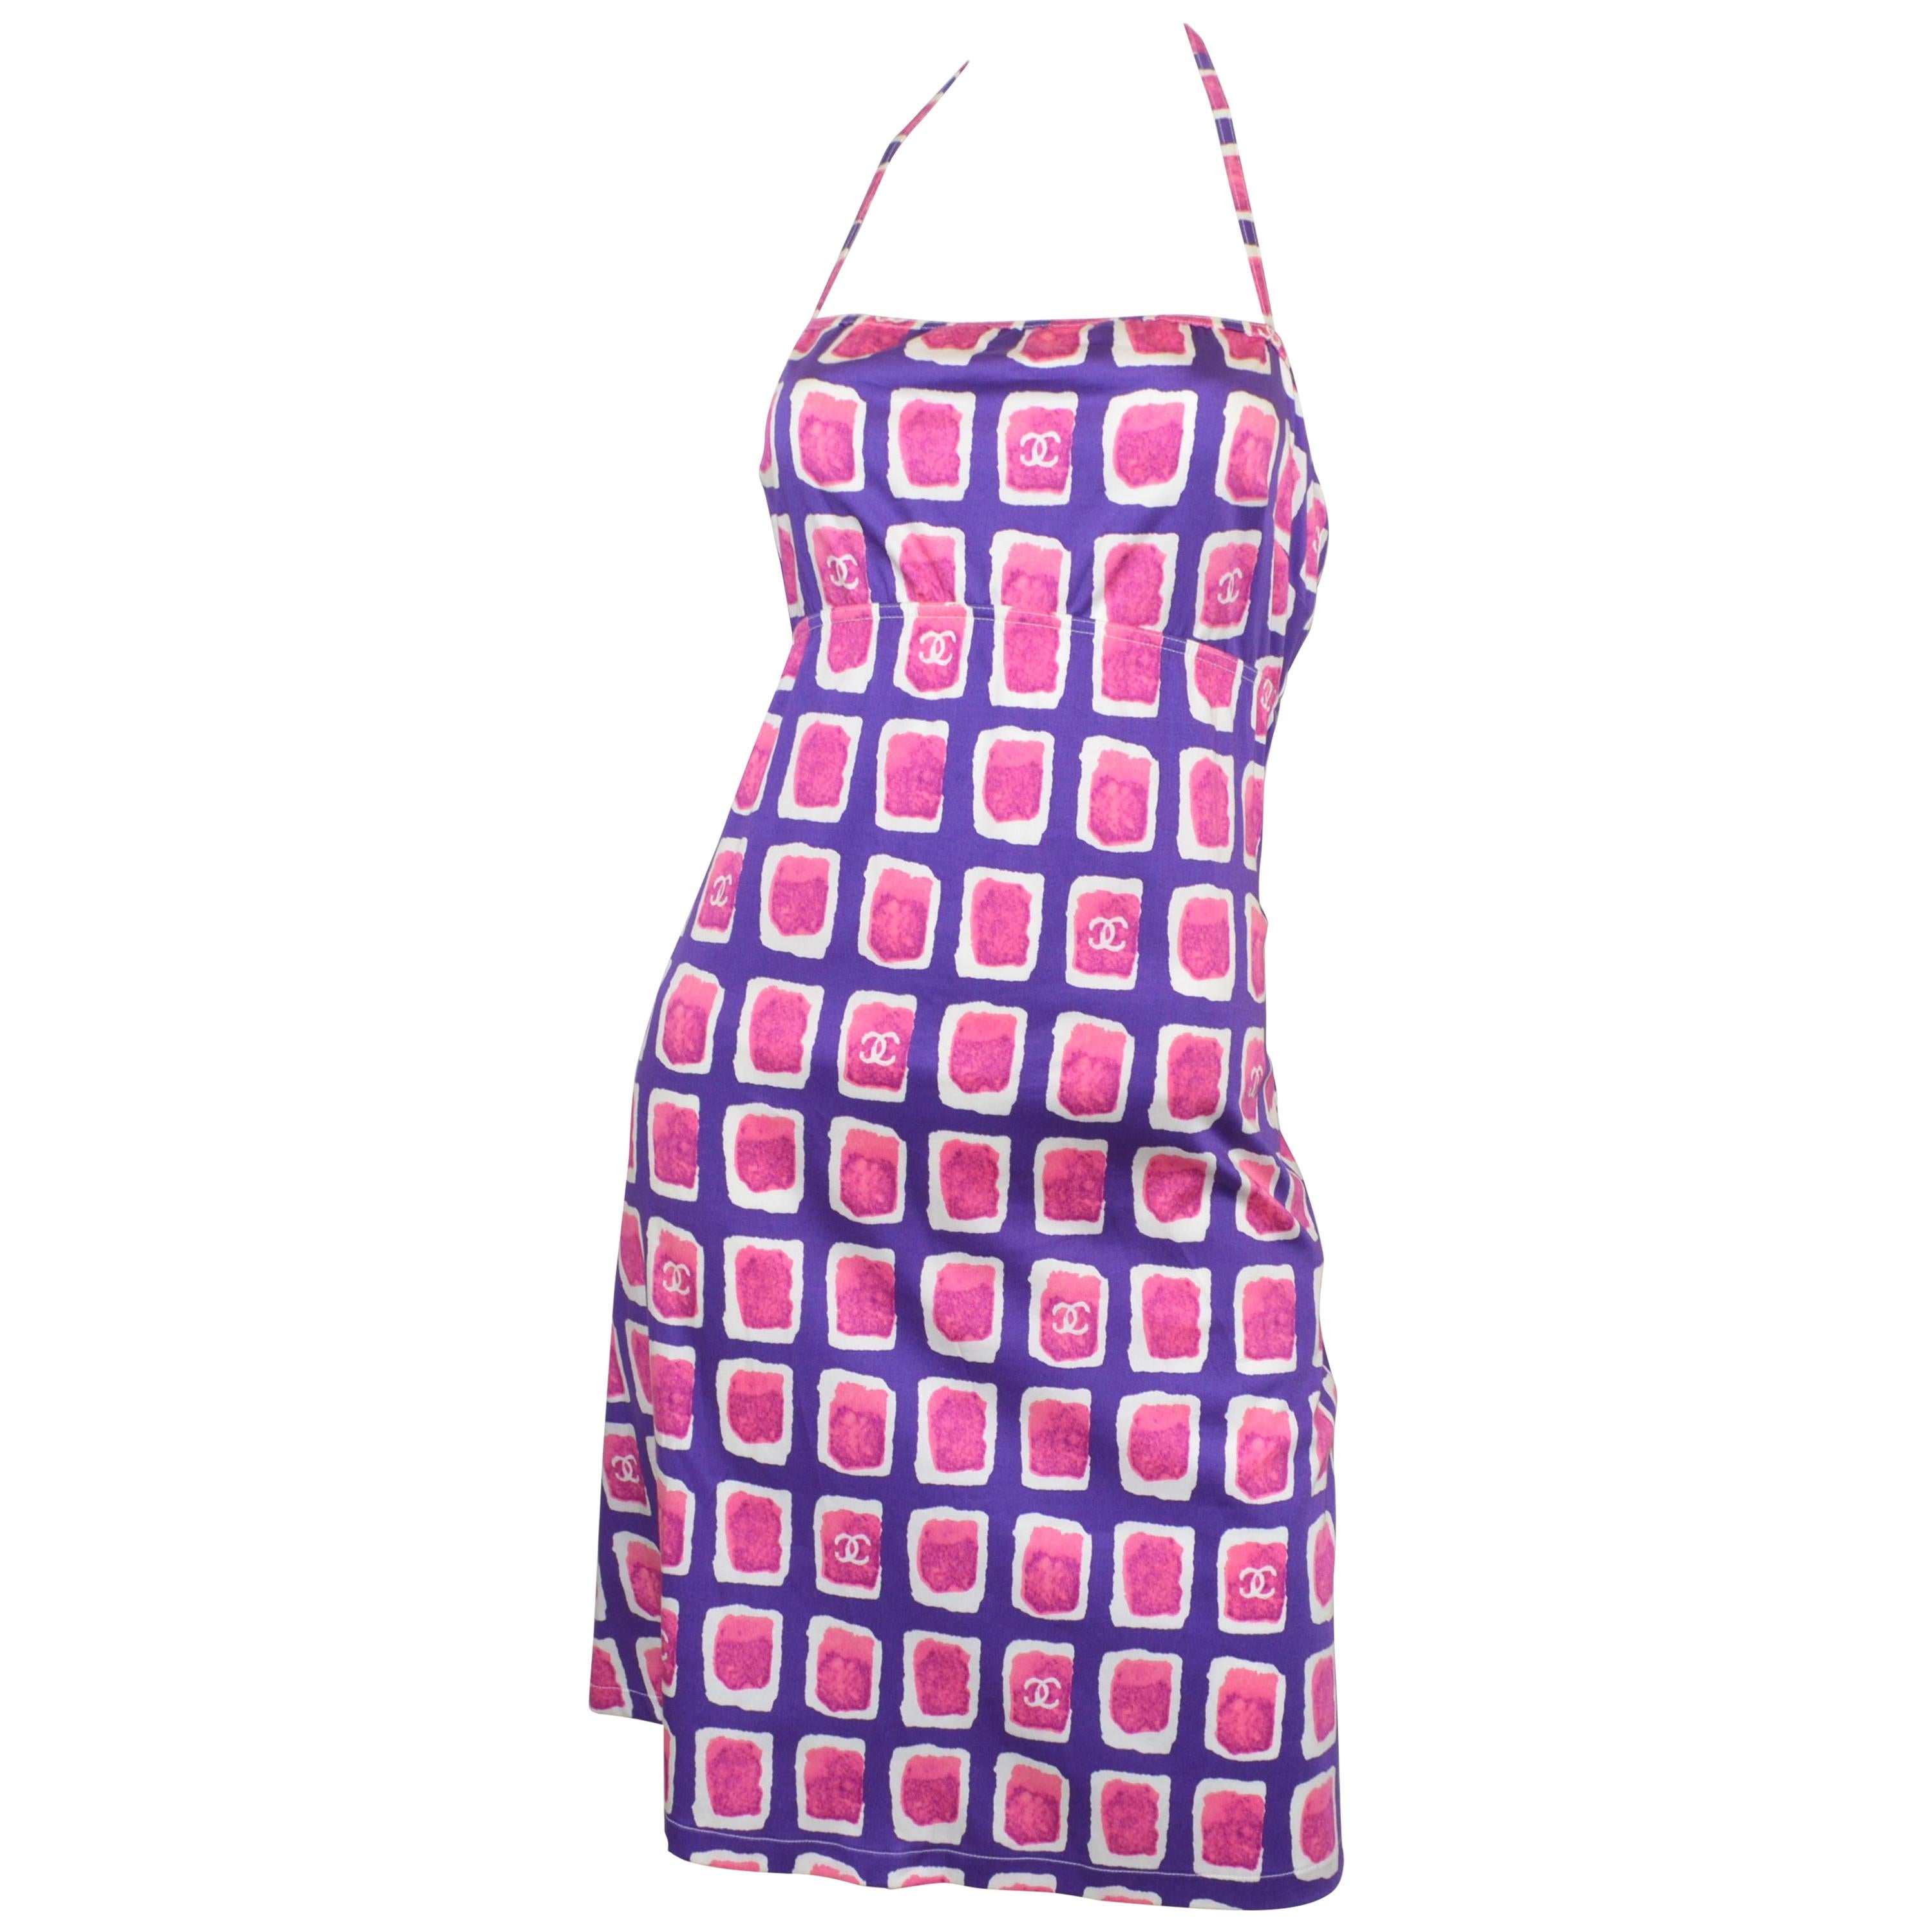 Chanel Patterned Halter Dress NWT 2001 P